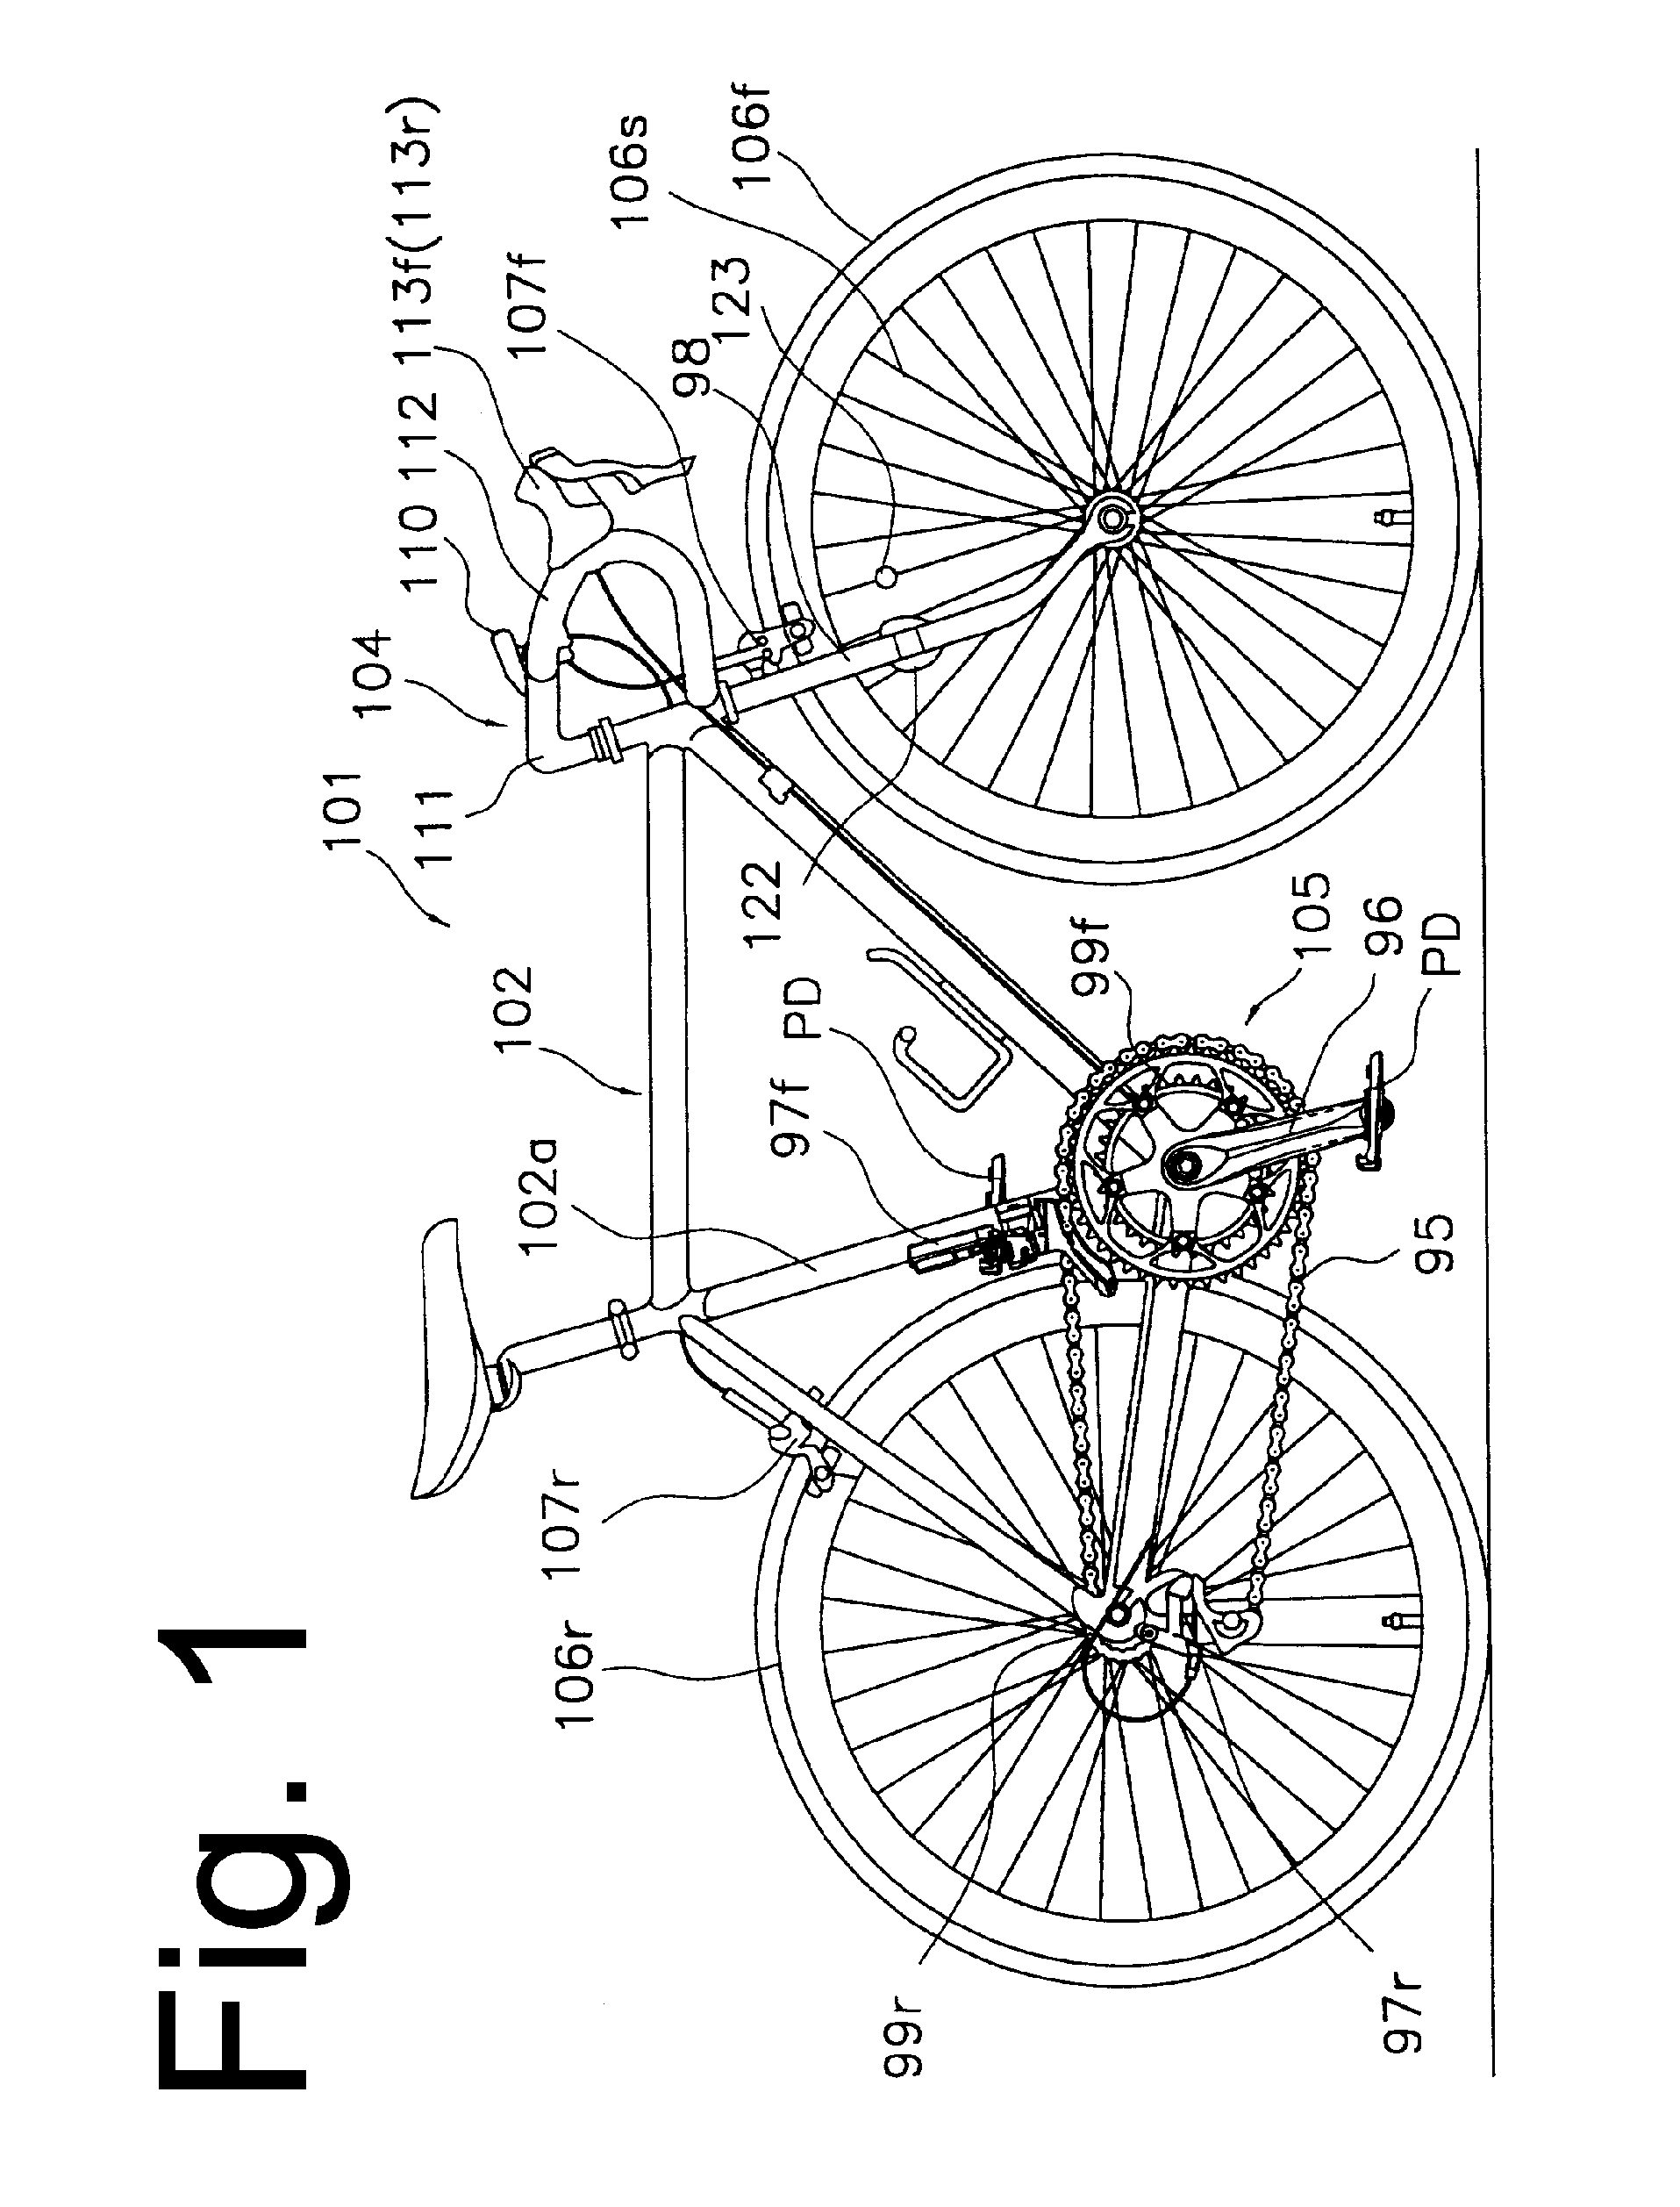 Apparatus for adjusting a position of a bicycle derailleur